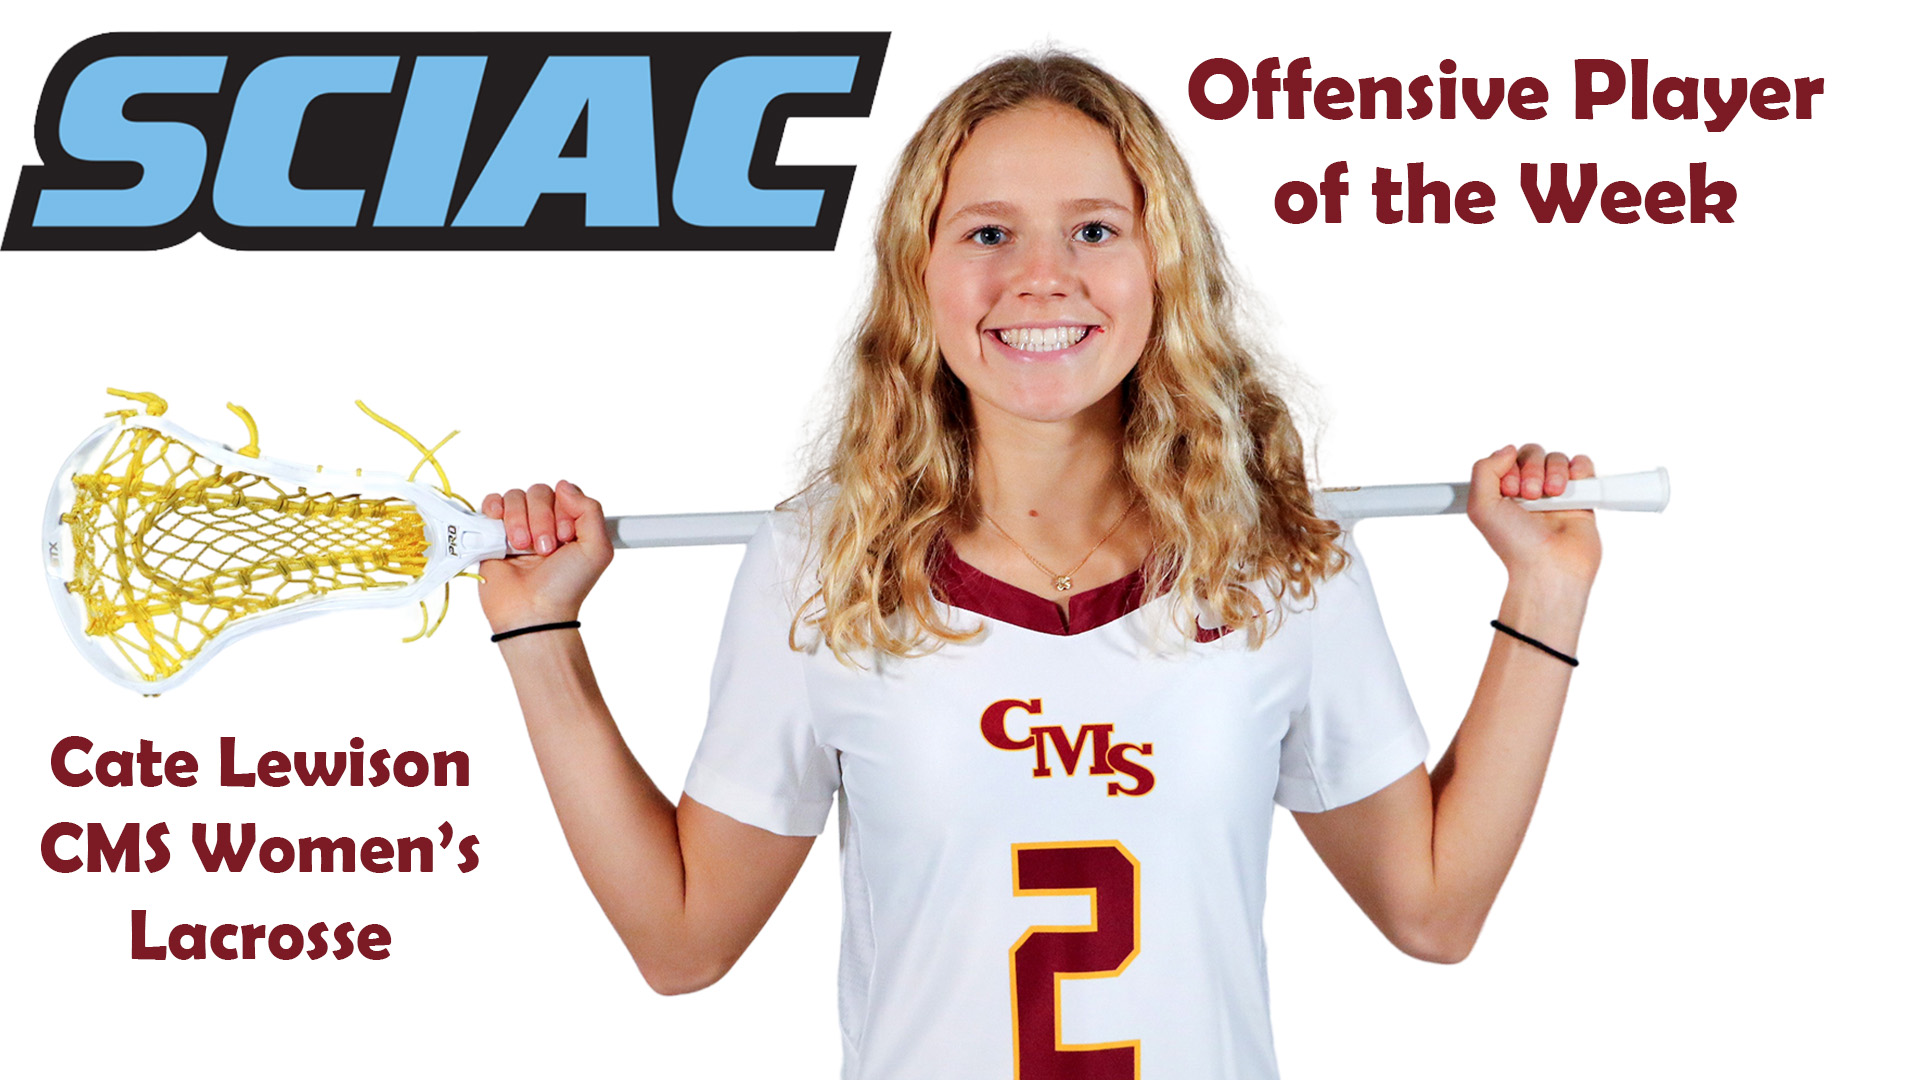 Posed shot of Cate Lewison with SCIAC logo